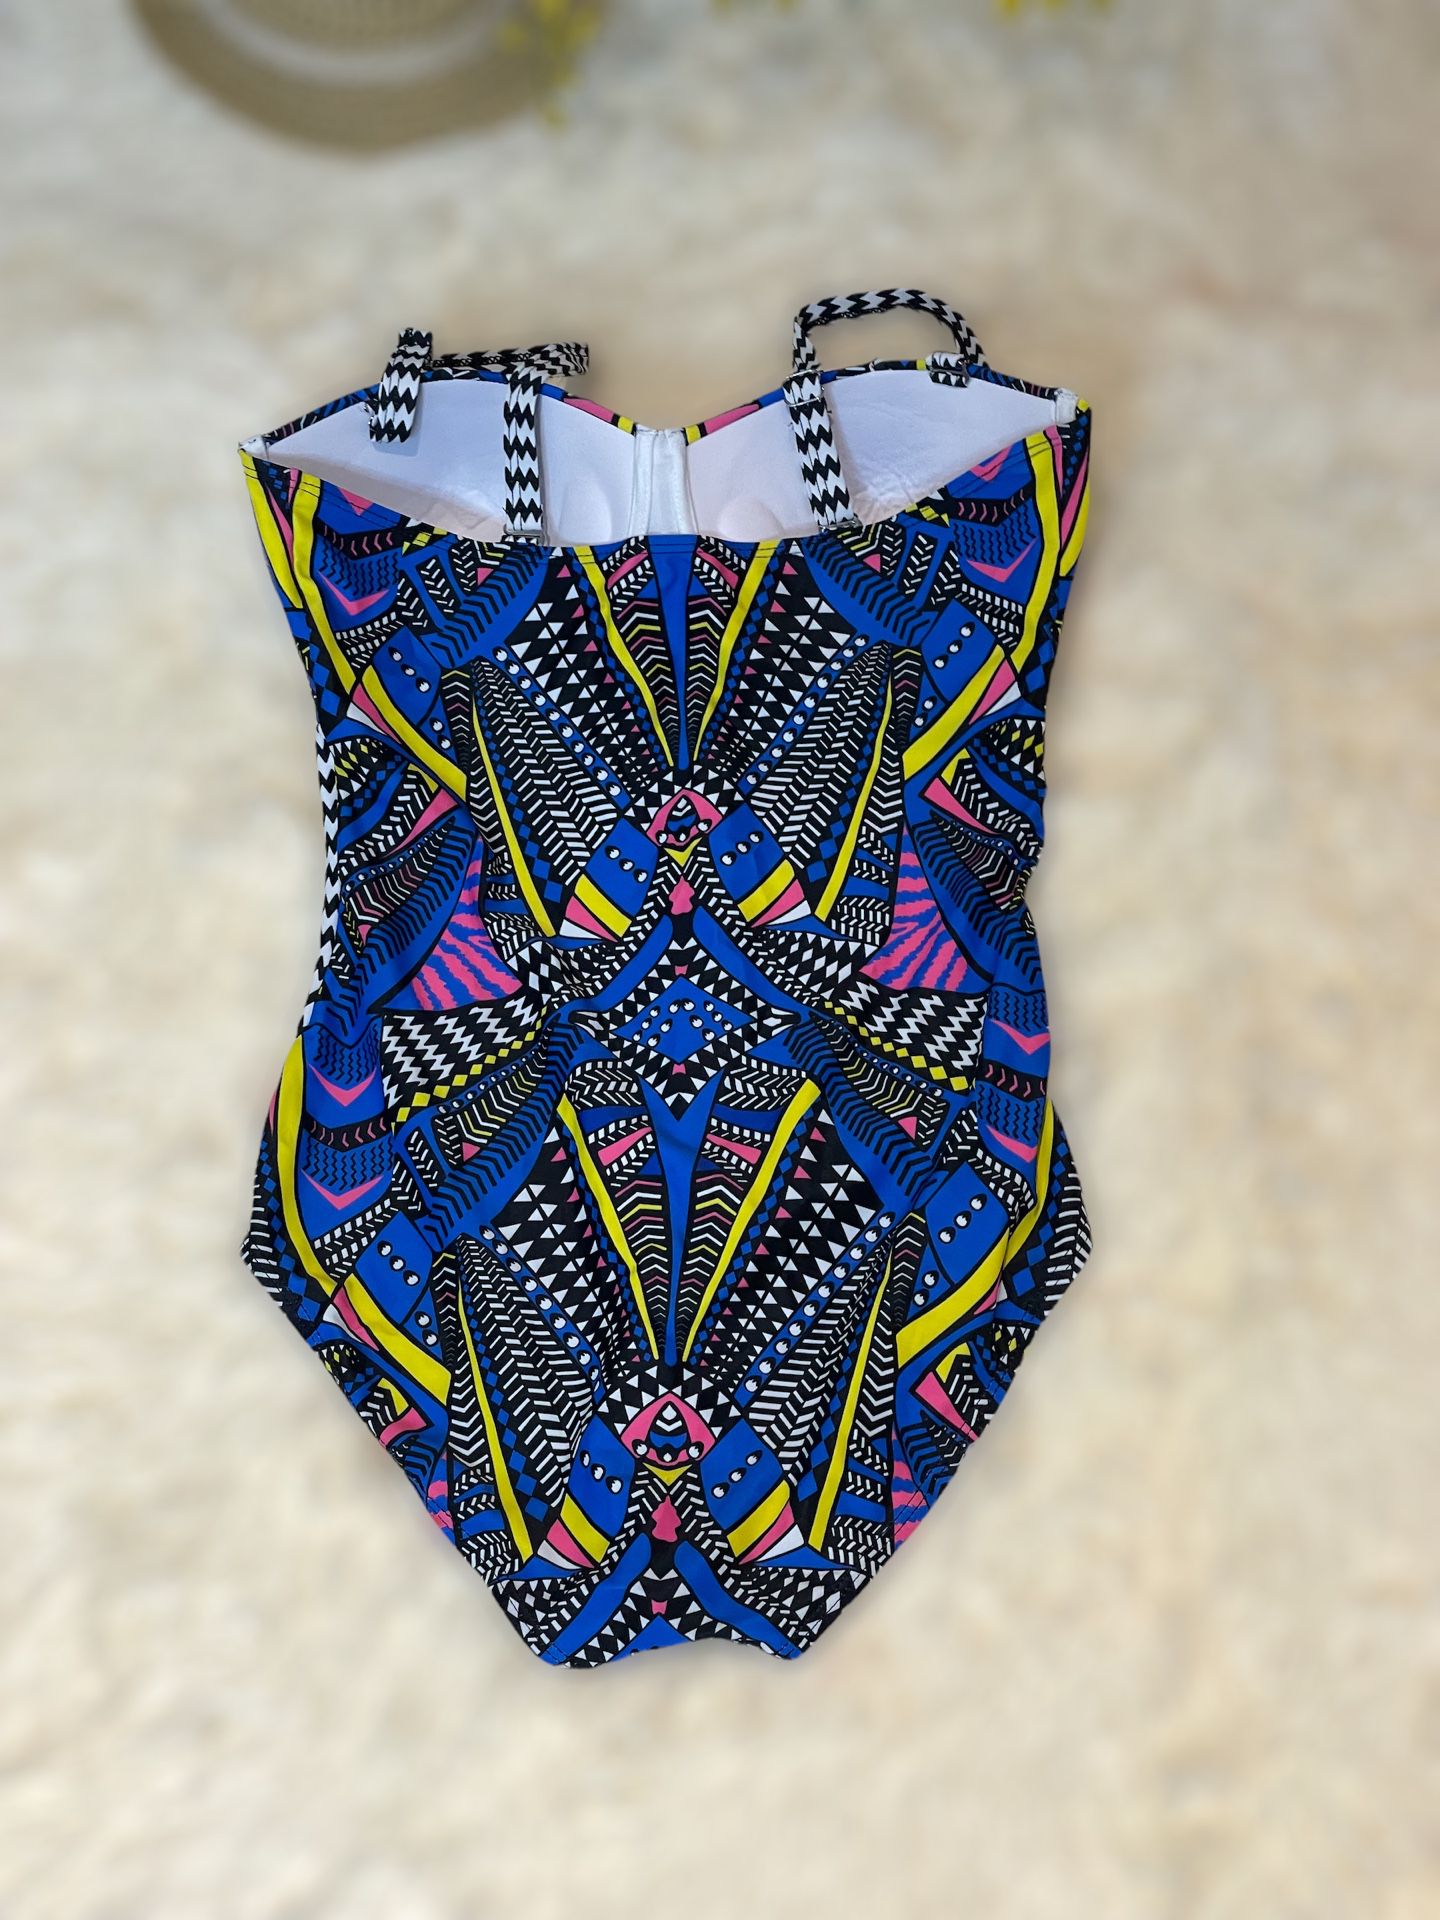 Xl Chanel One Piece Swimwear for Sale in Highland, MD - OfferUp